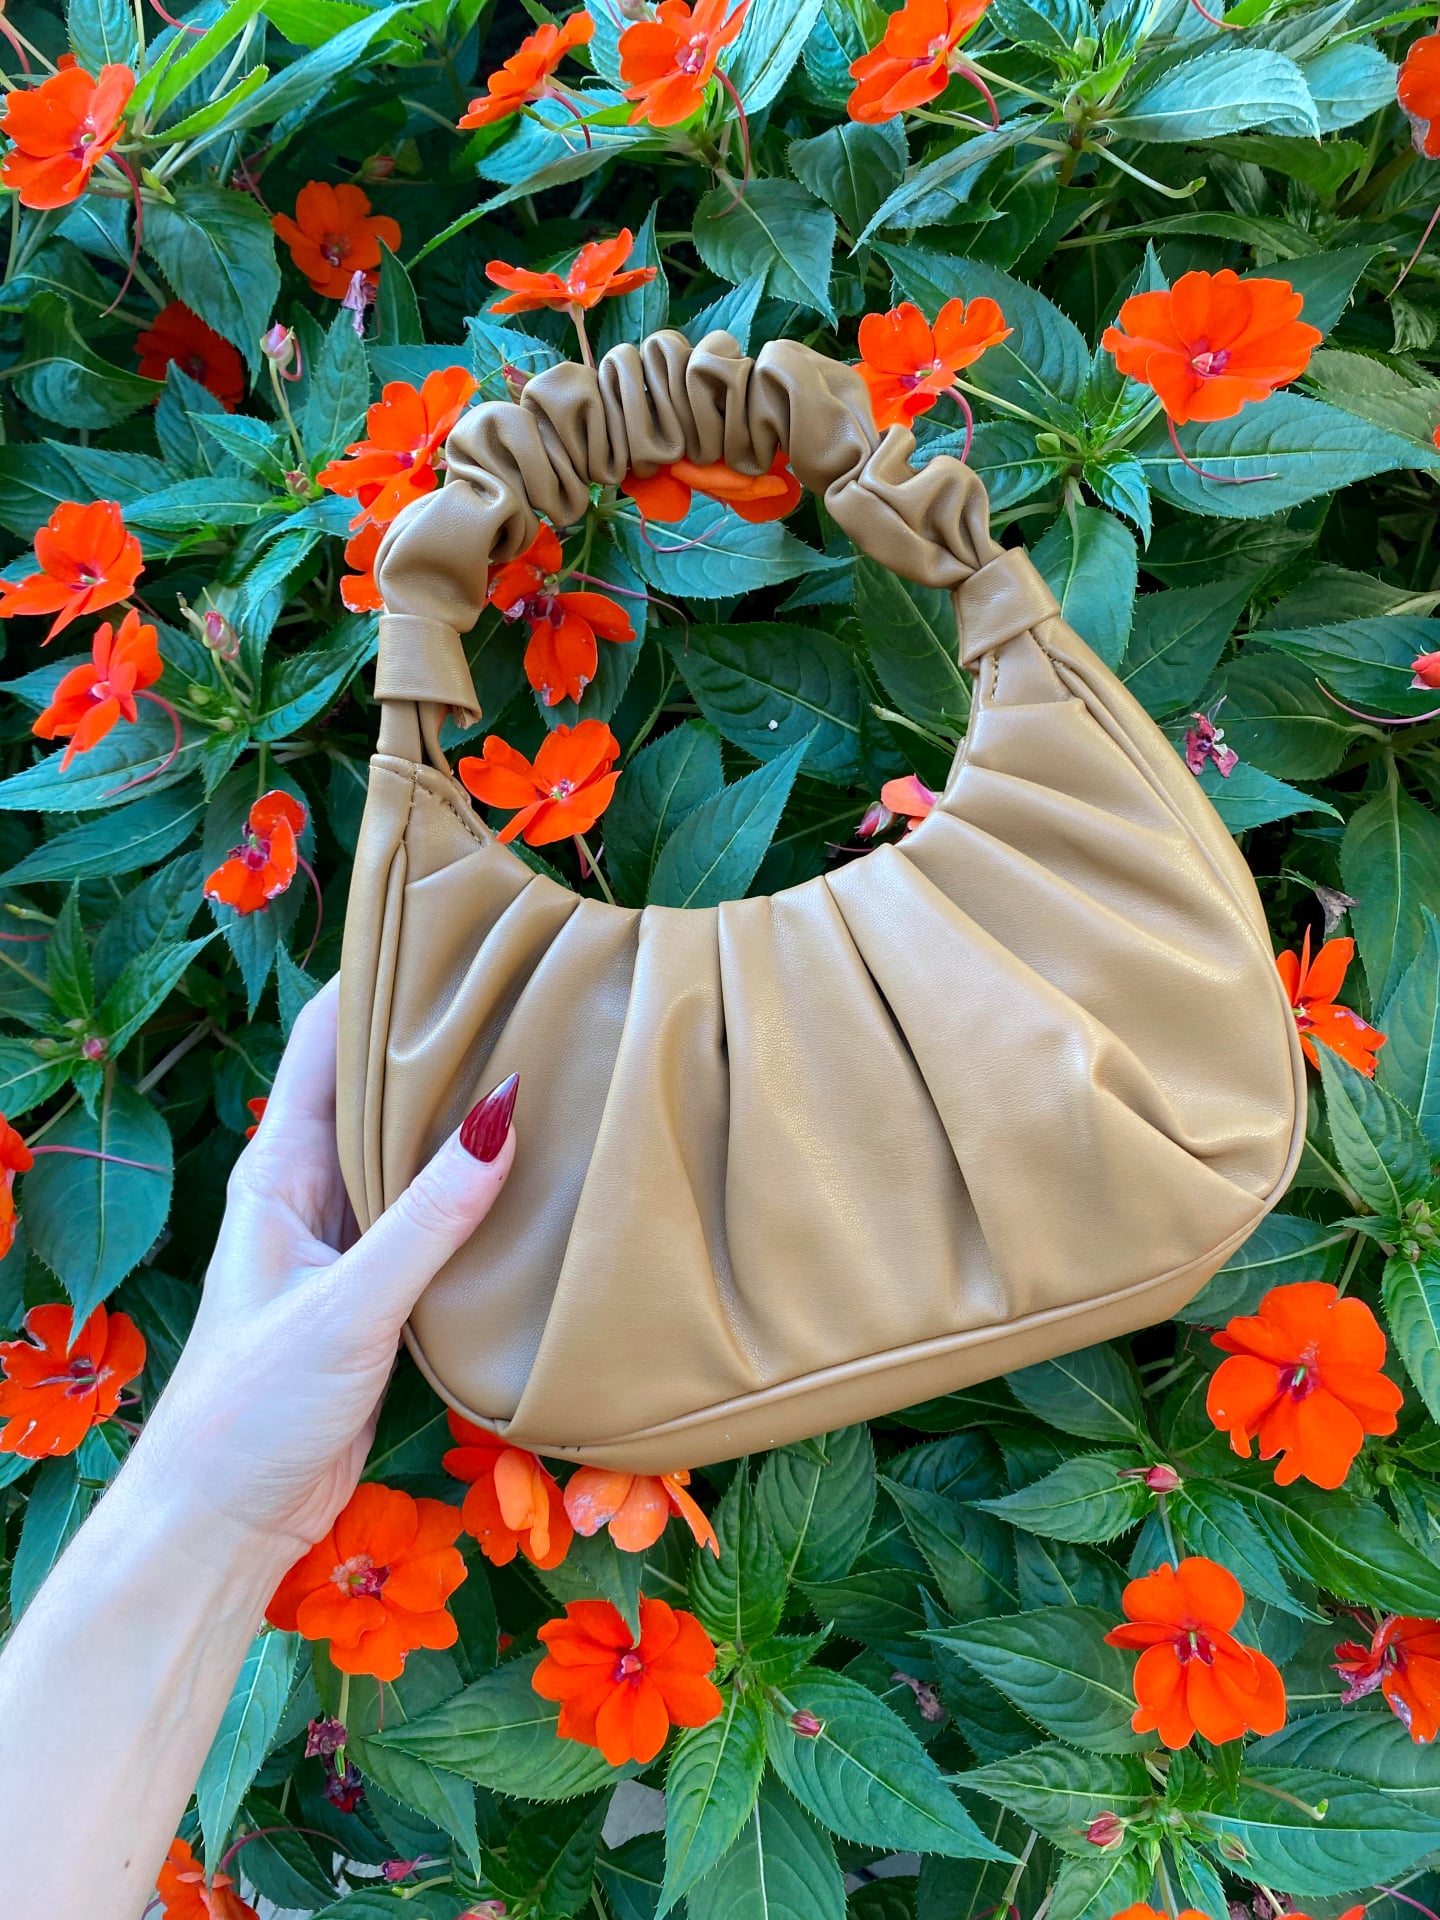 A Review of the Scrunchie Shoulder Bag From Walmart, 2021